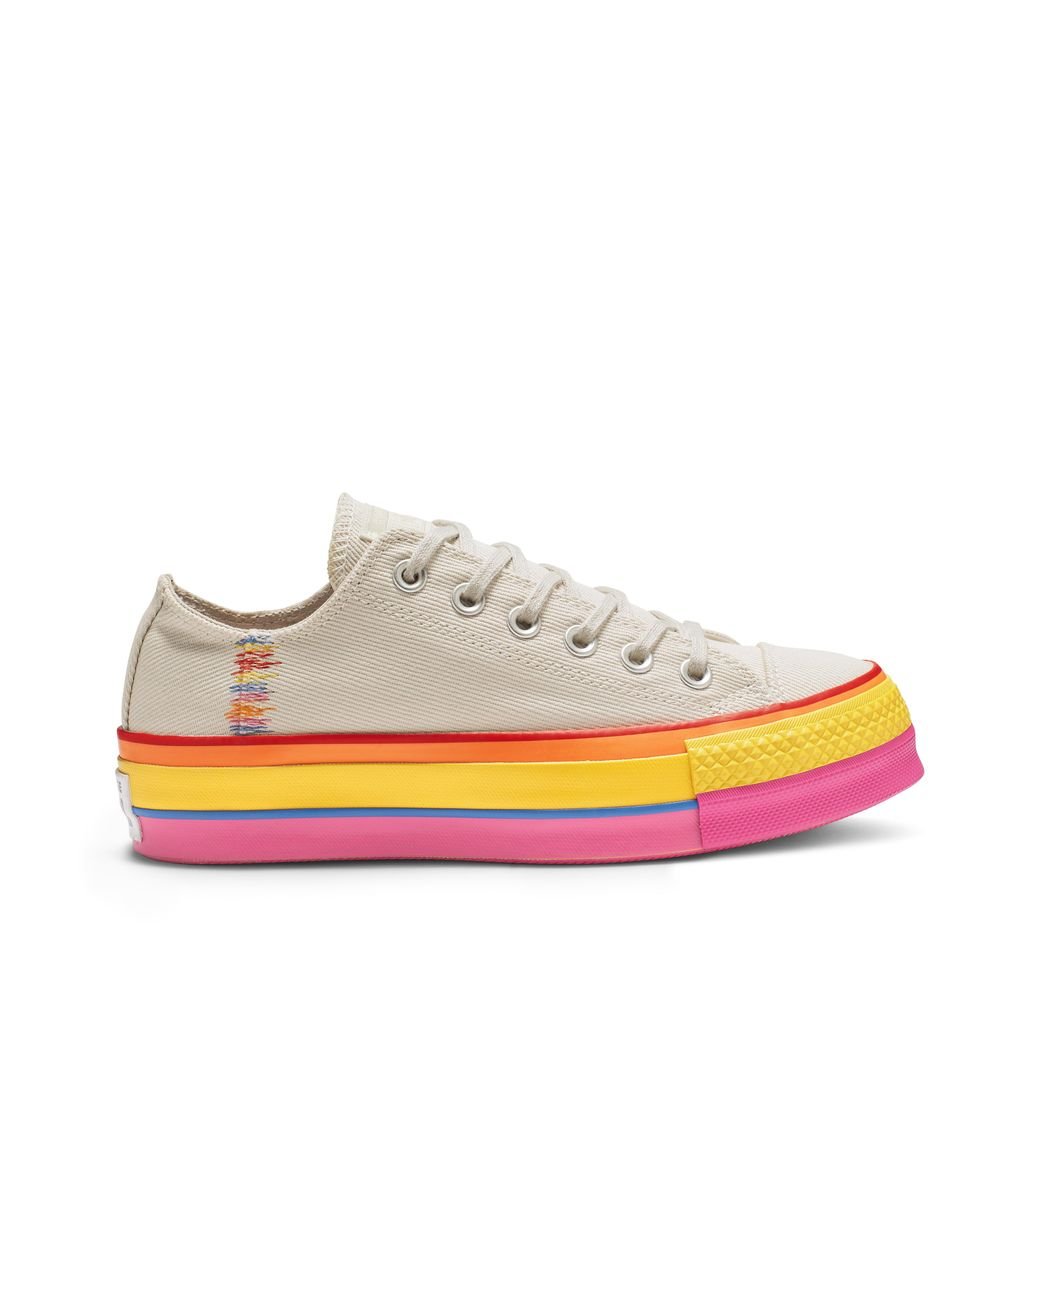 Converse Chuck Taylor All Star Rainbow Platform Low Top in White | Lyst